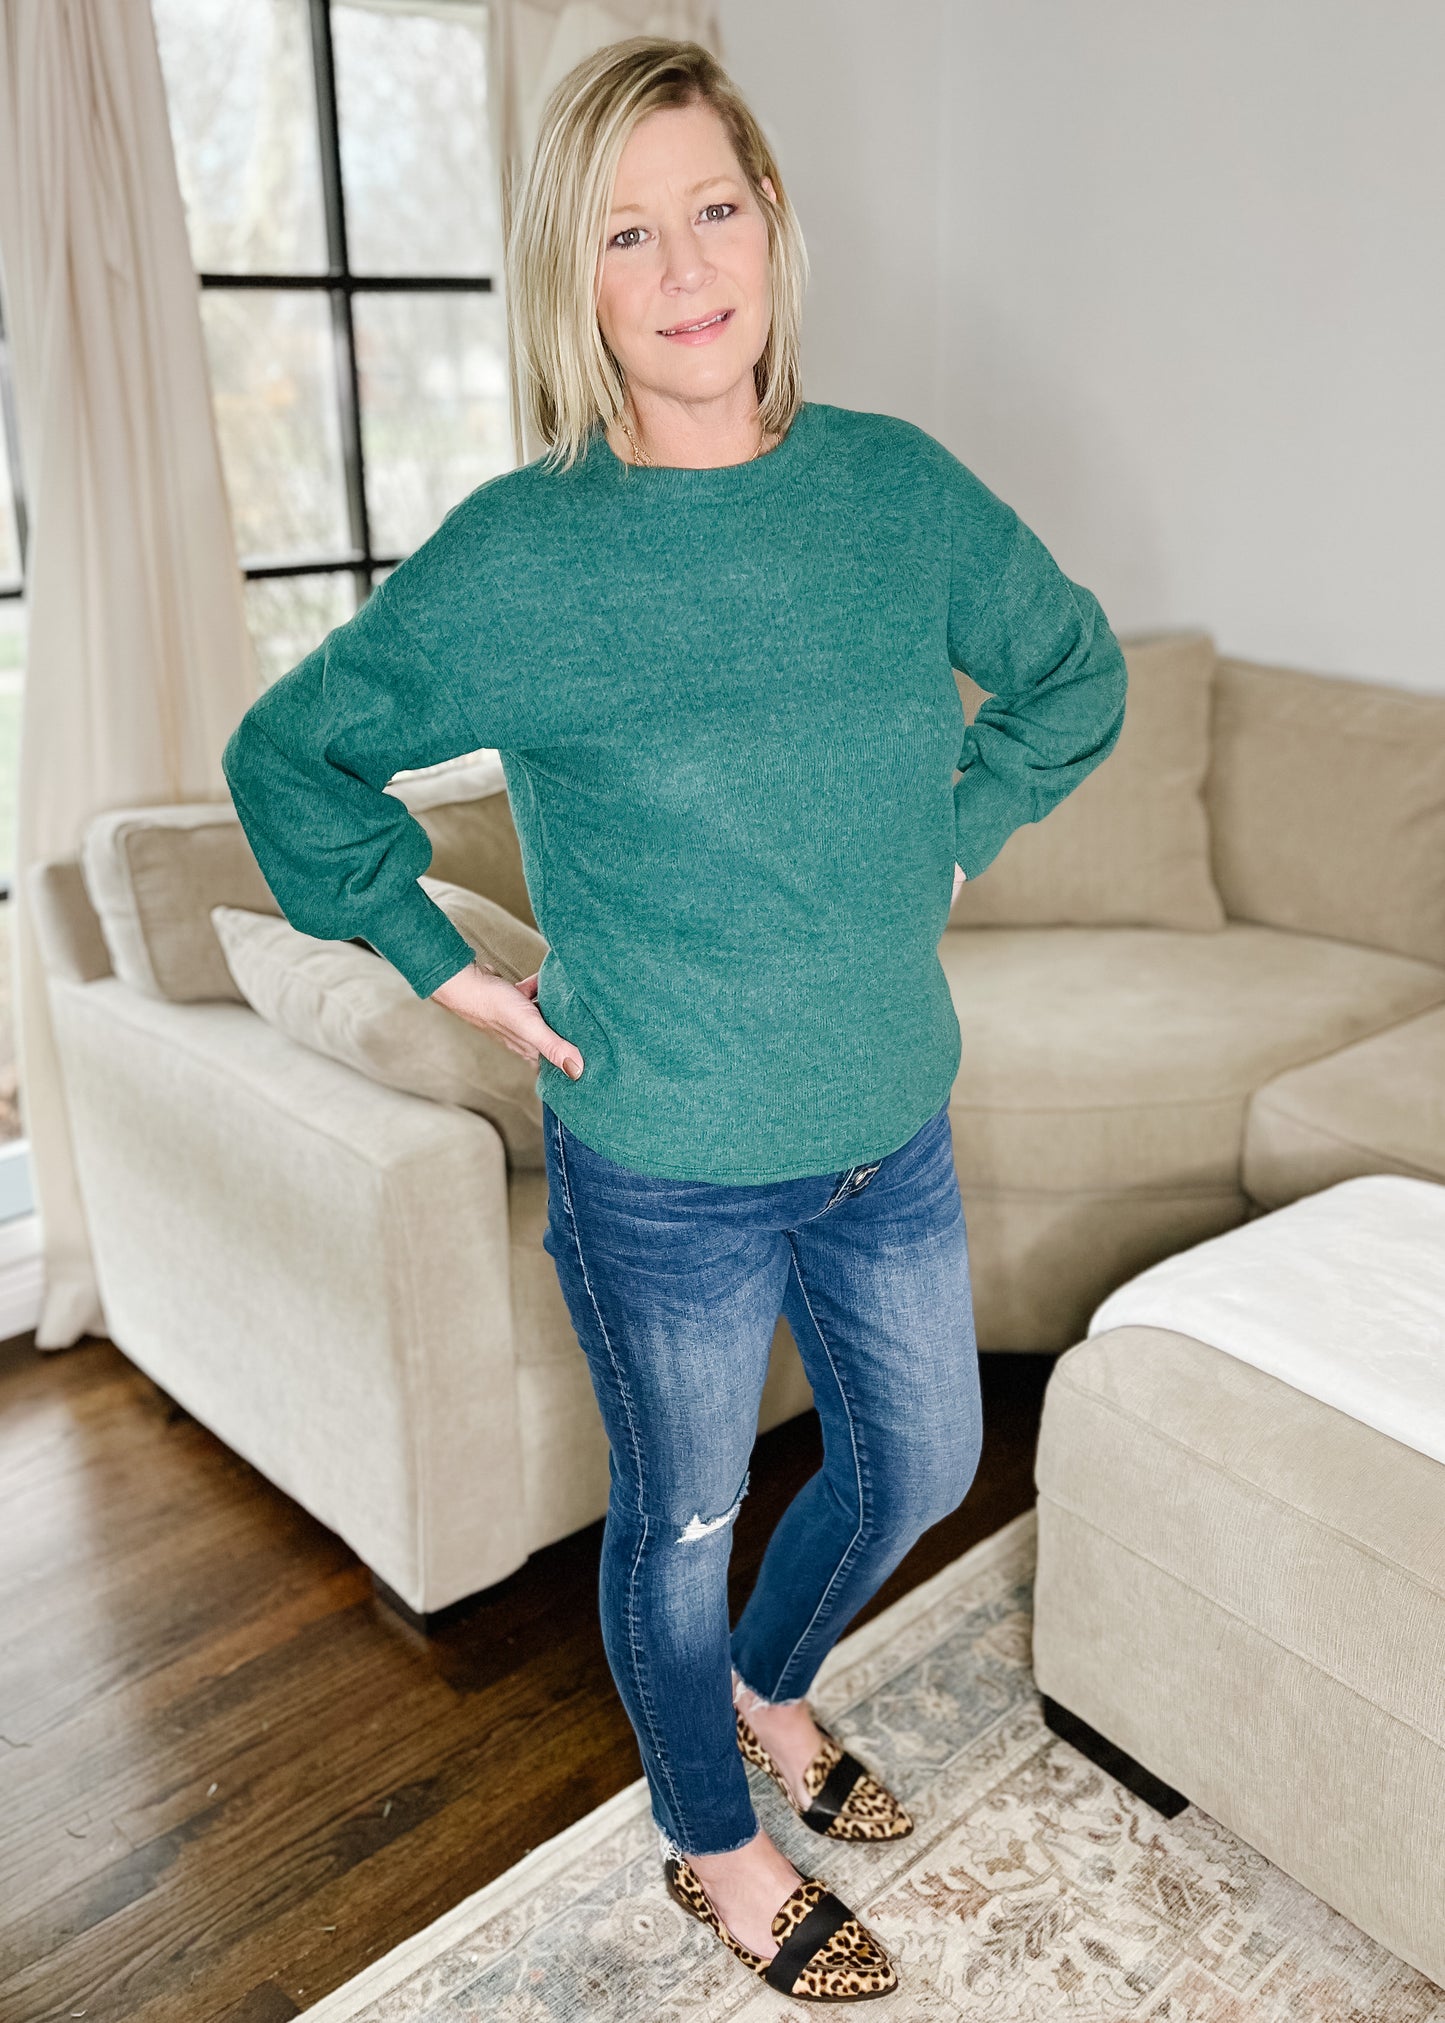 Emerald green lightweight sweater with rounded neckline, slightly puffed sleeves and rounded hemline. Fixed style. 